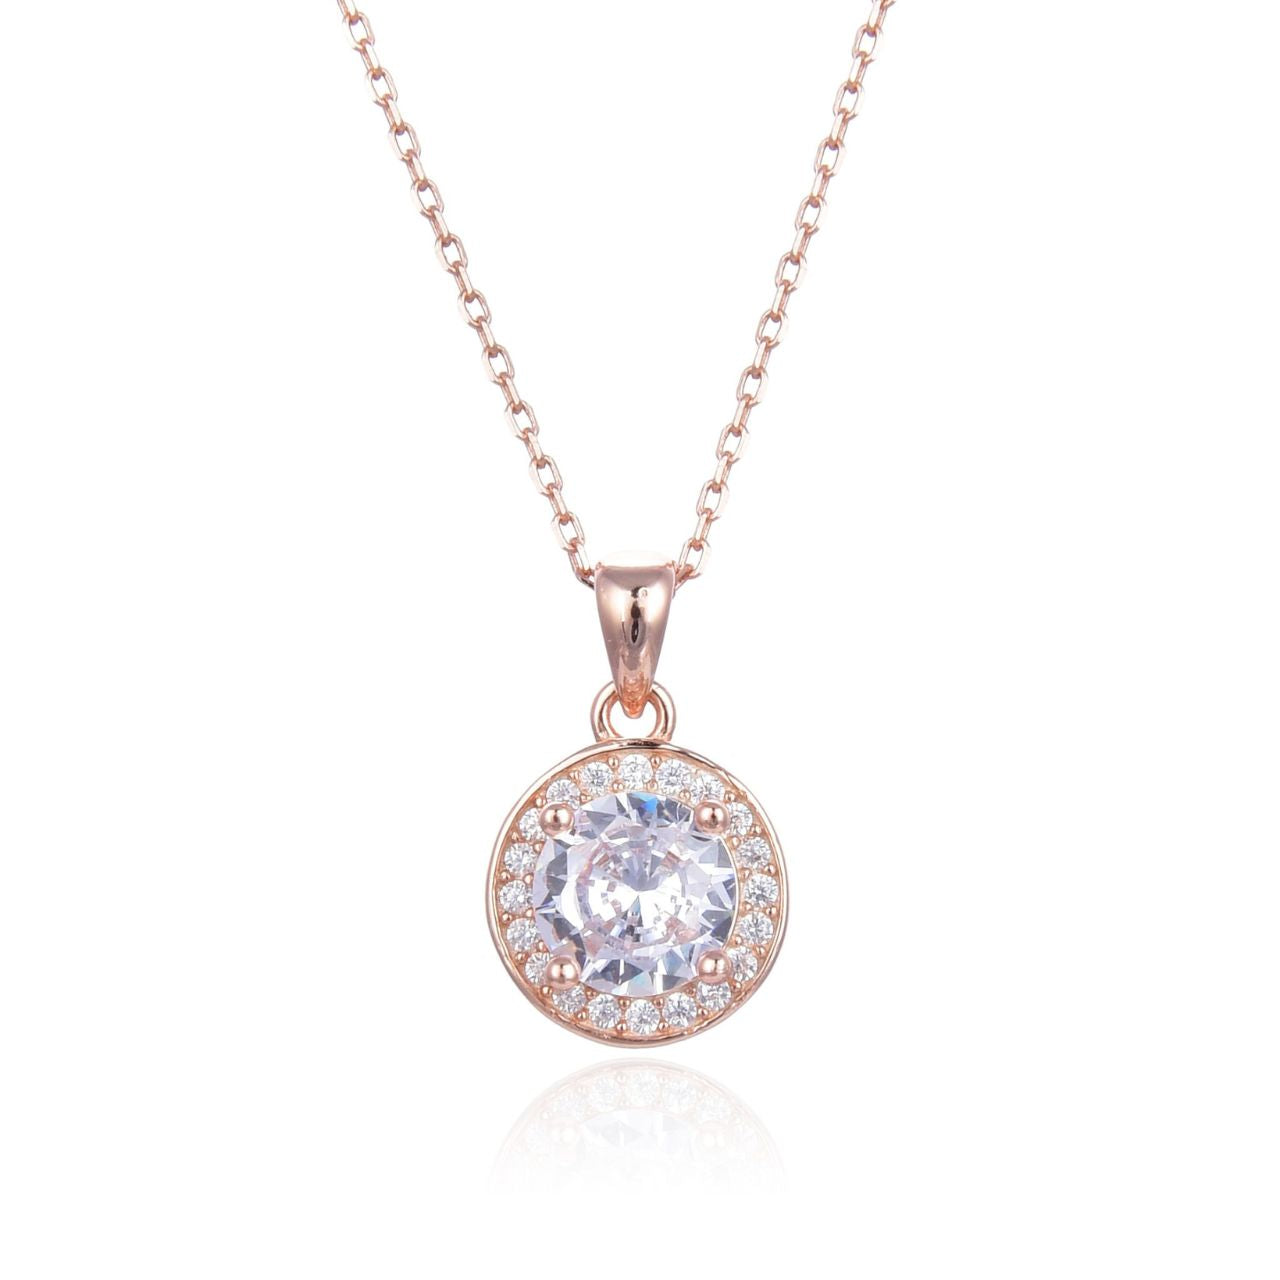 Rose Gold Diamante Necklace by Kilkenny Silver  Sterling silver pendant with clear coloured stones on 18 inch chain.